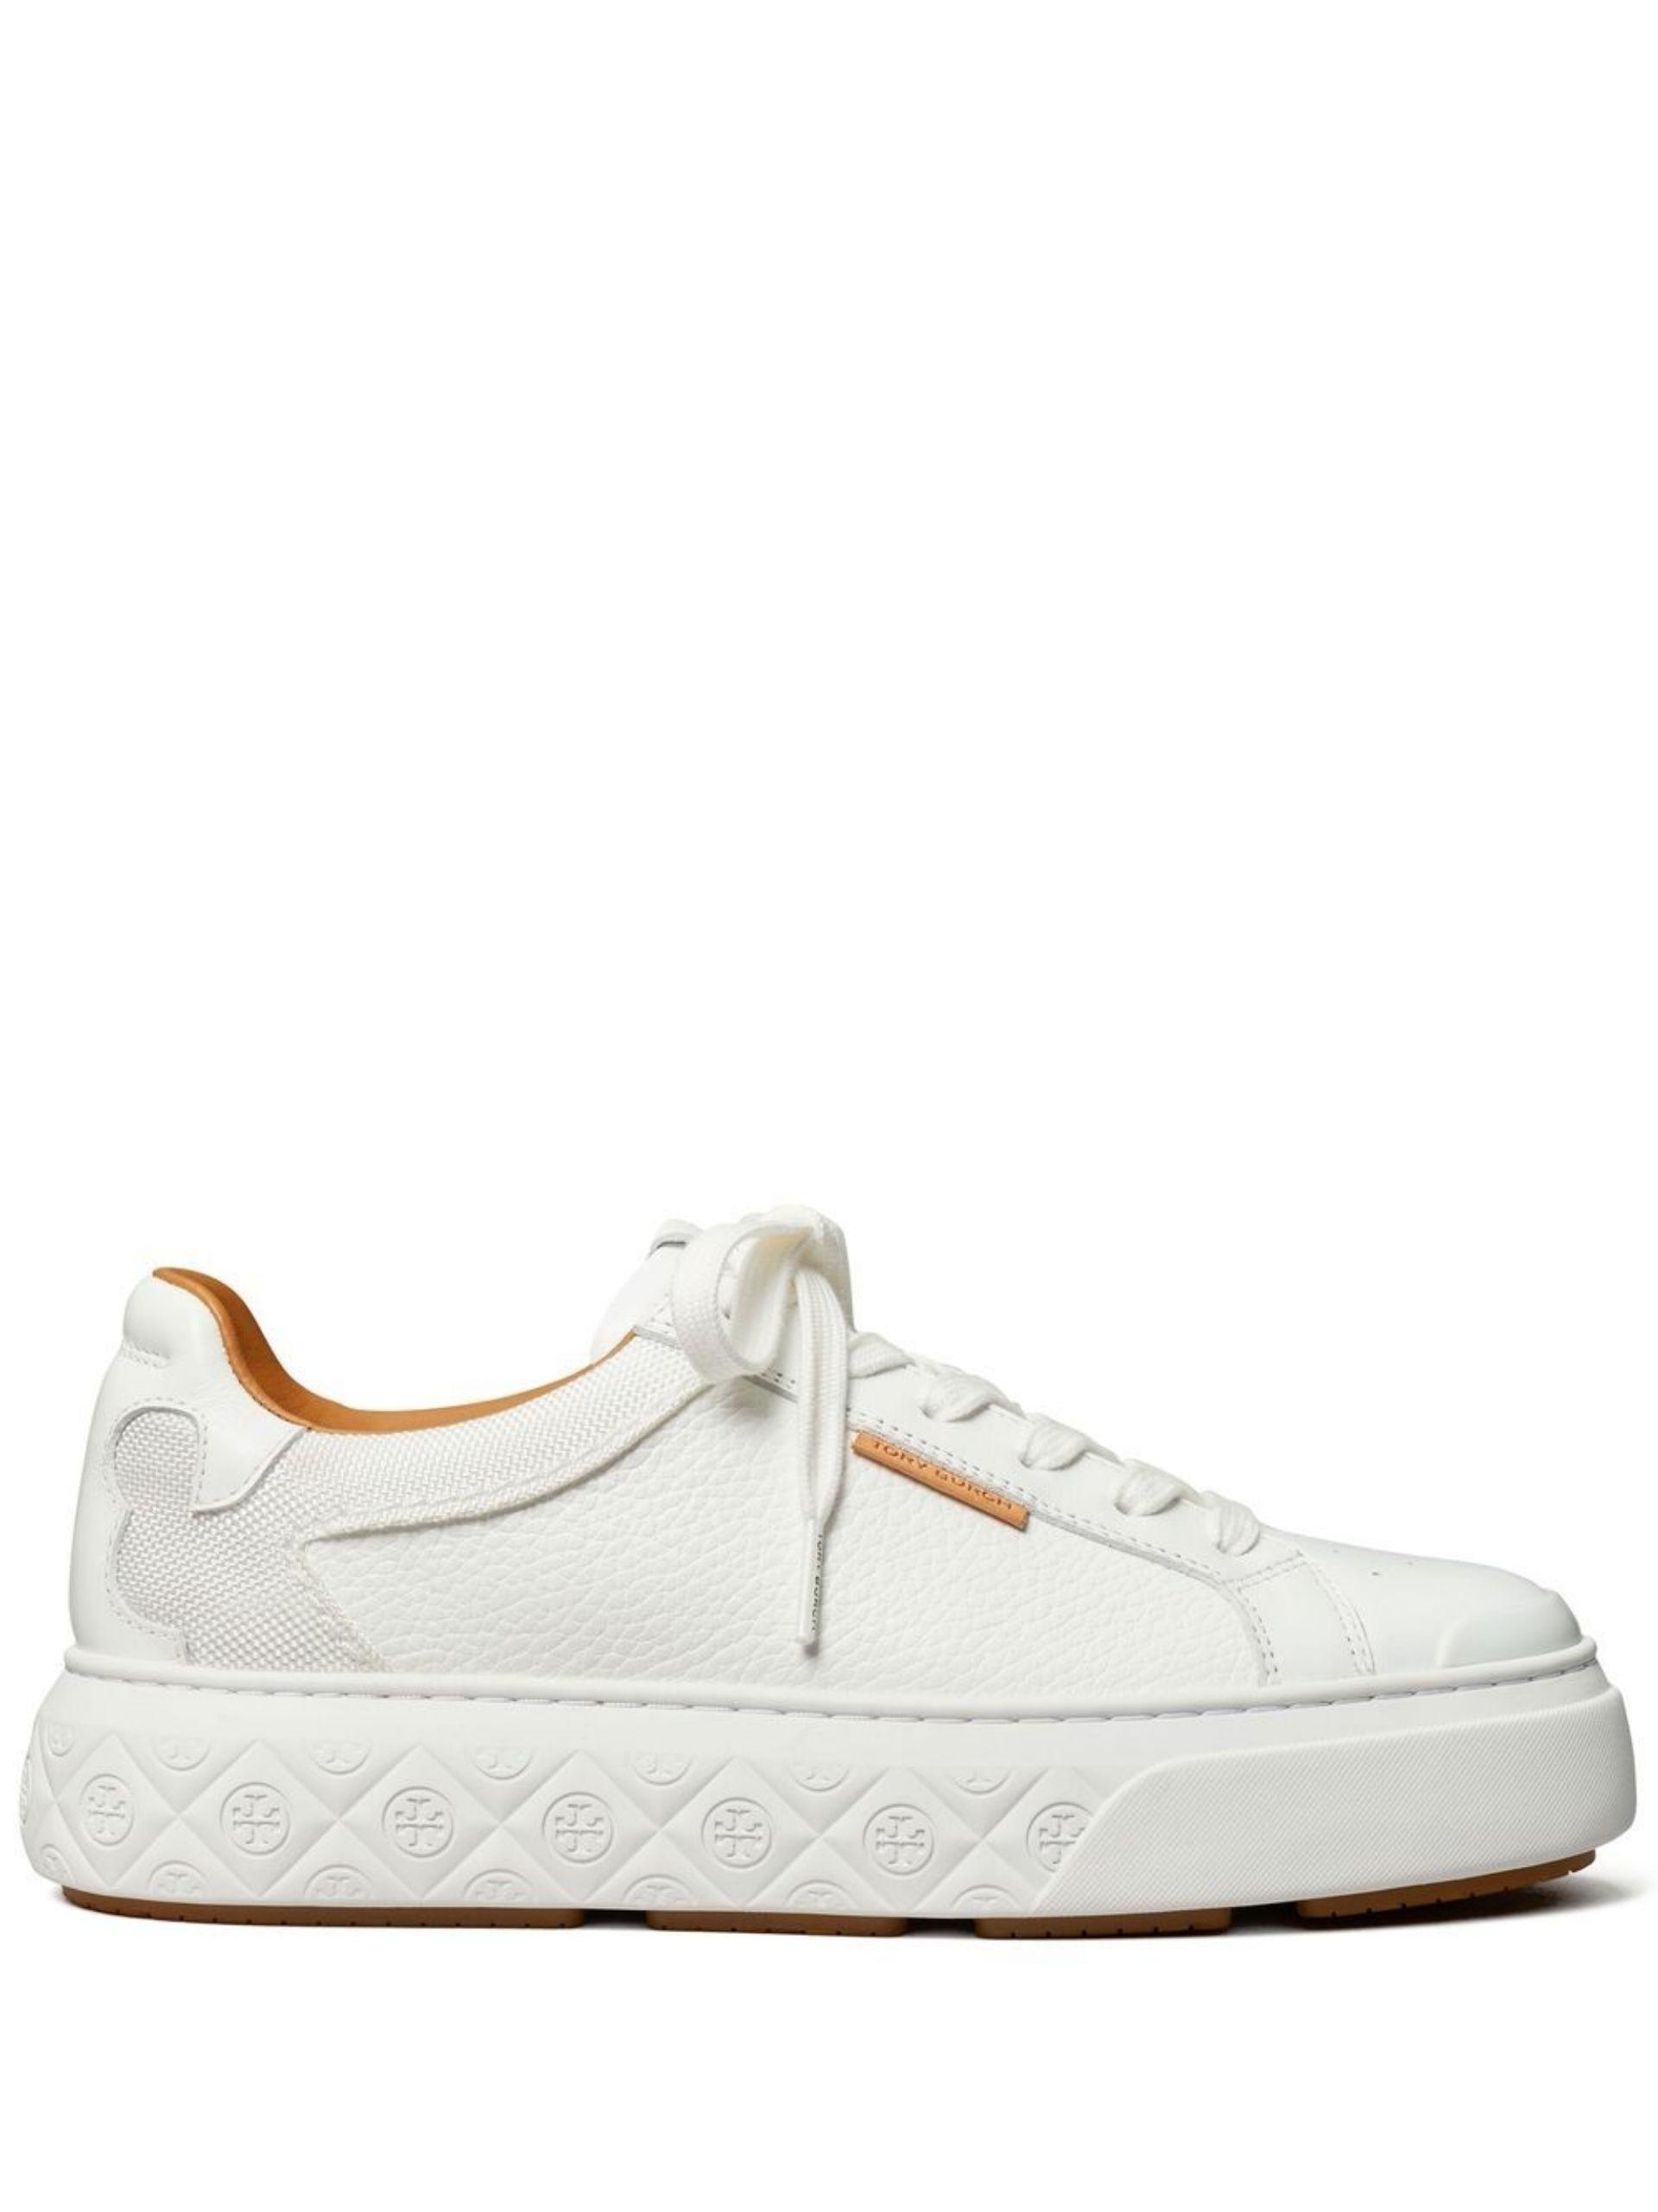 Tory Burch Ladybug Platform Sneakers in White | Lyst